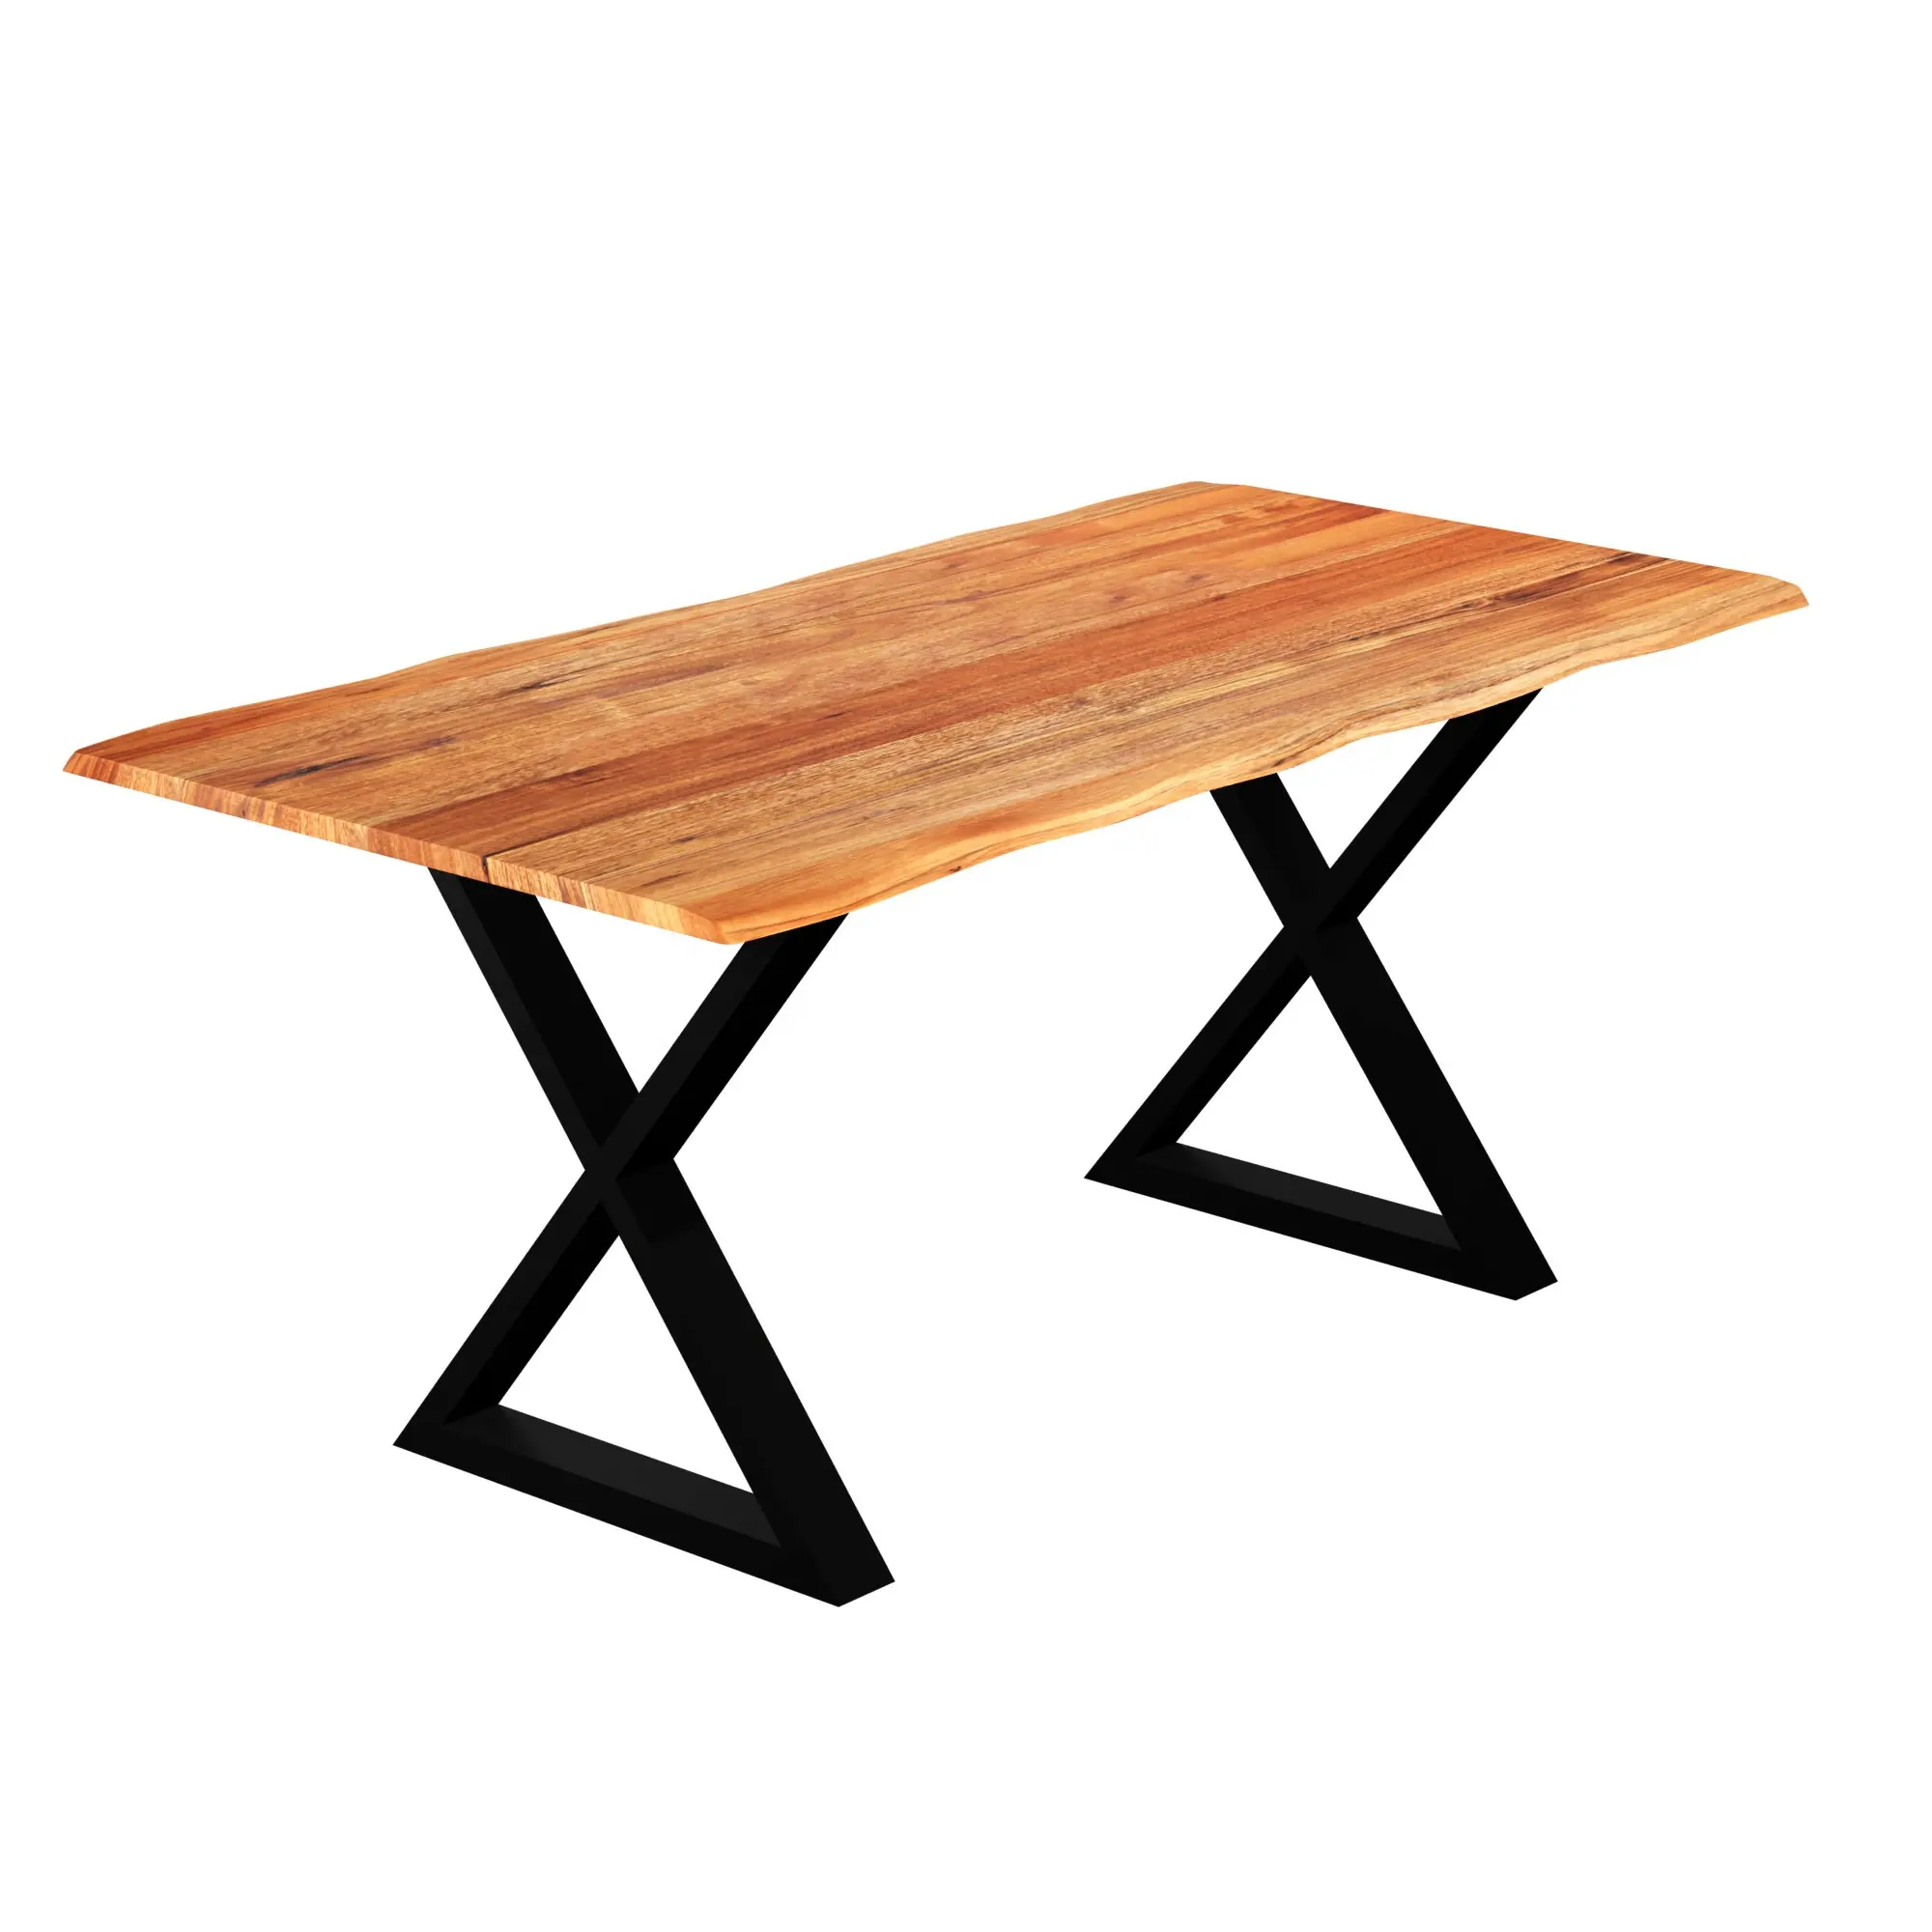 Wholesale Iron & Acaciawooden Solid Wood X Cross Legs Acacia Live Edge Dining Room Livingfurn Hot Selling Nordic Dining Table